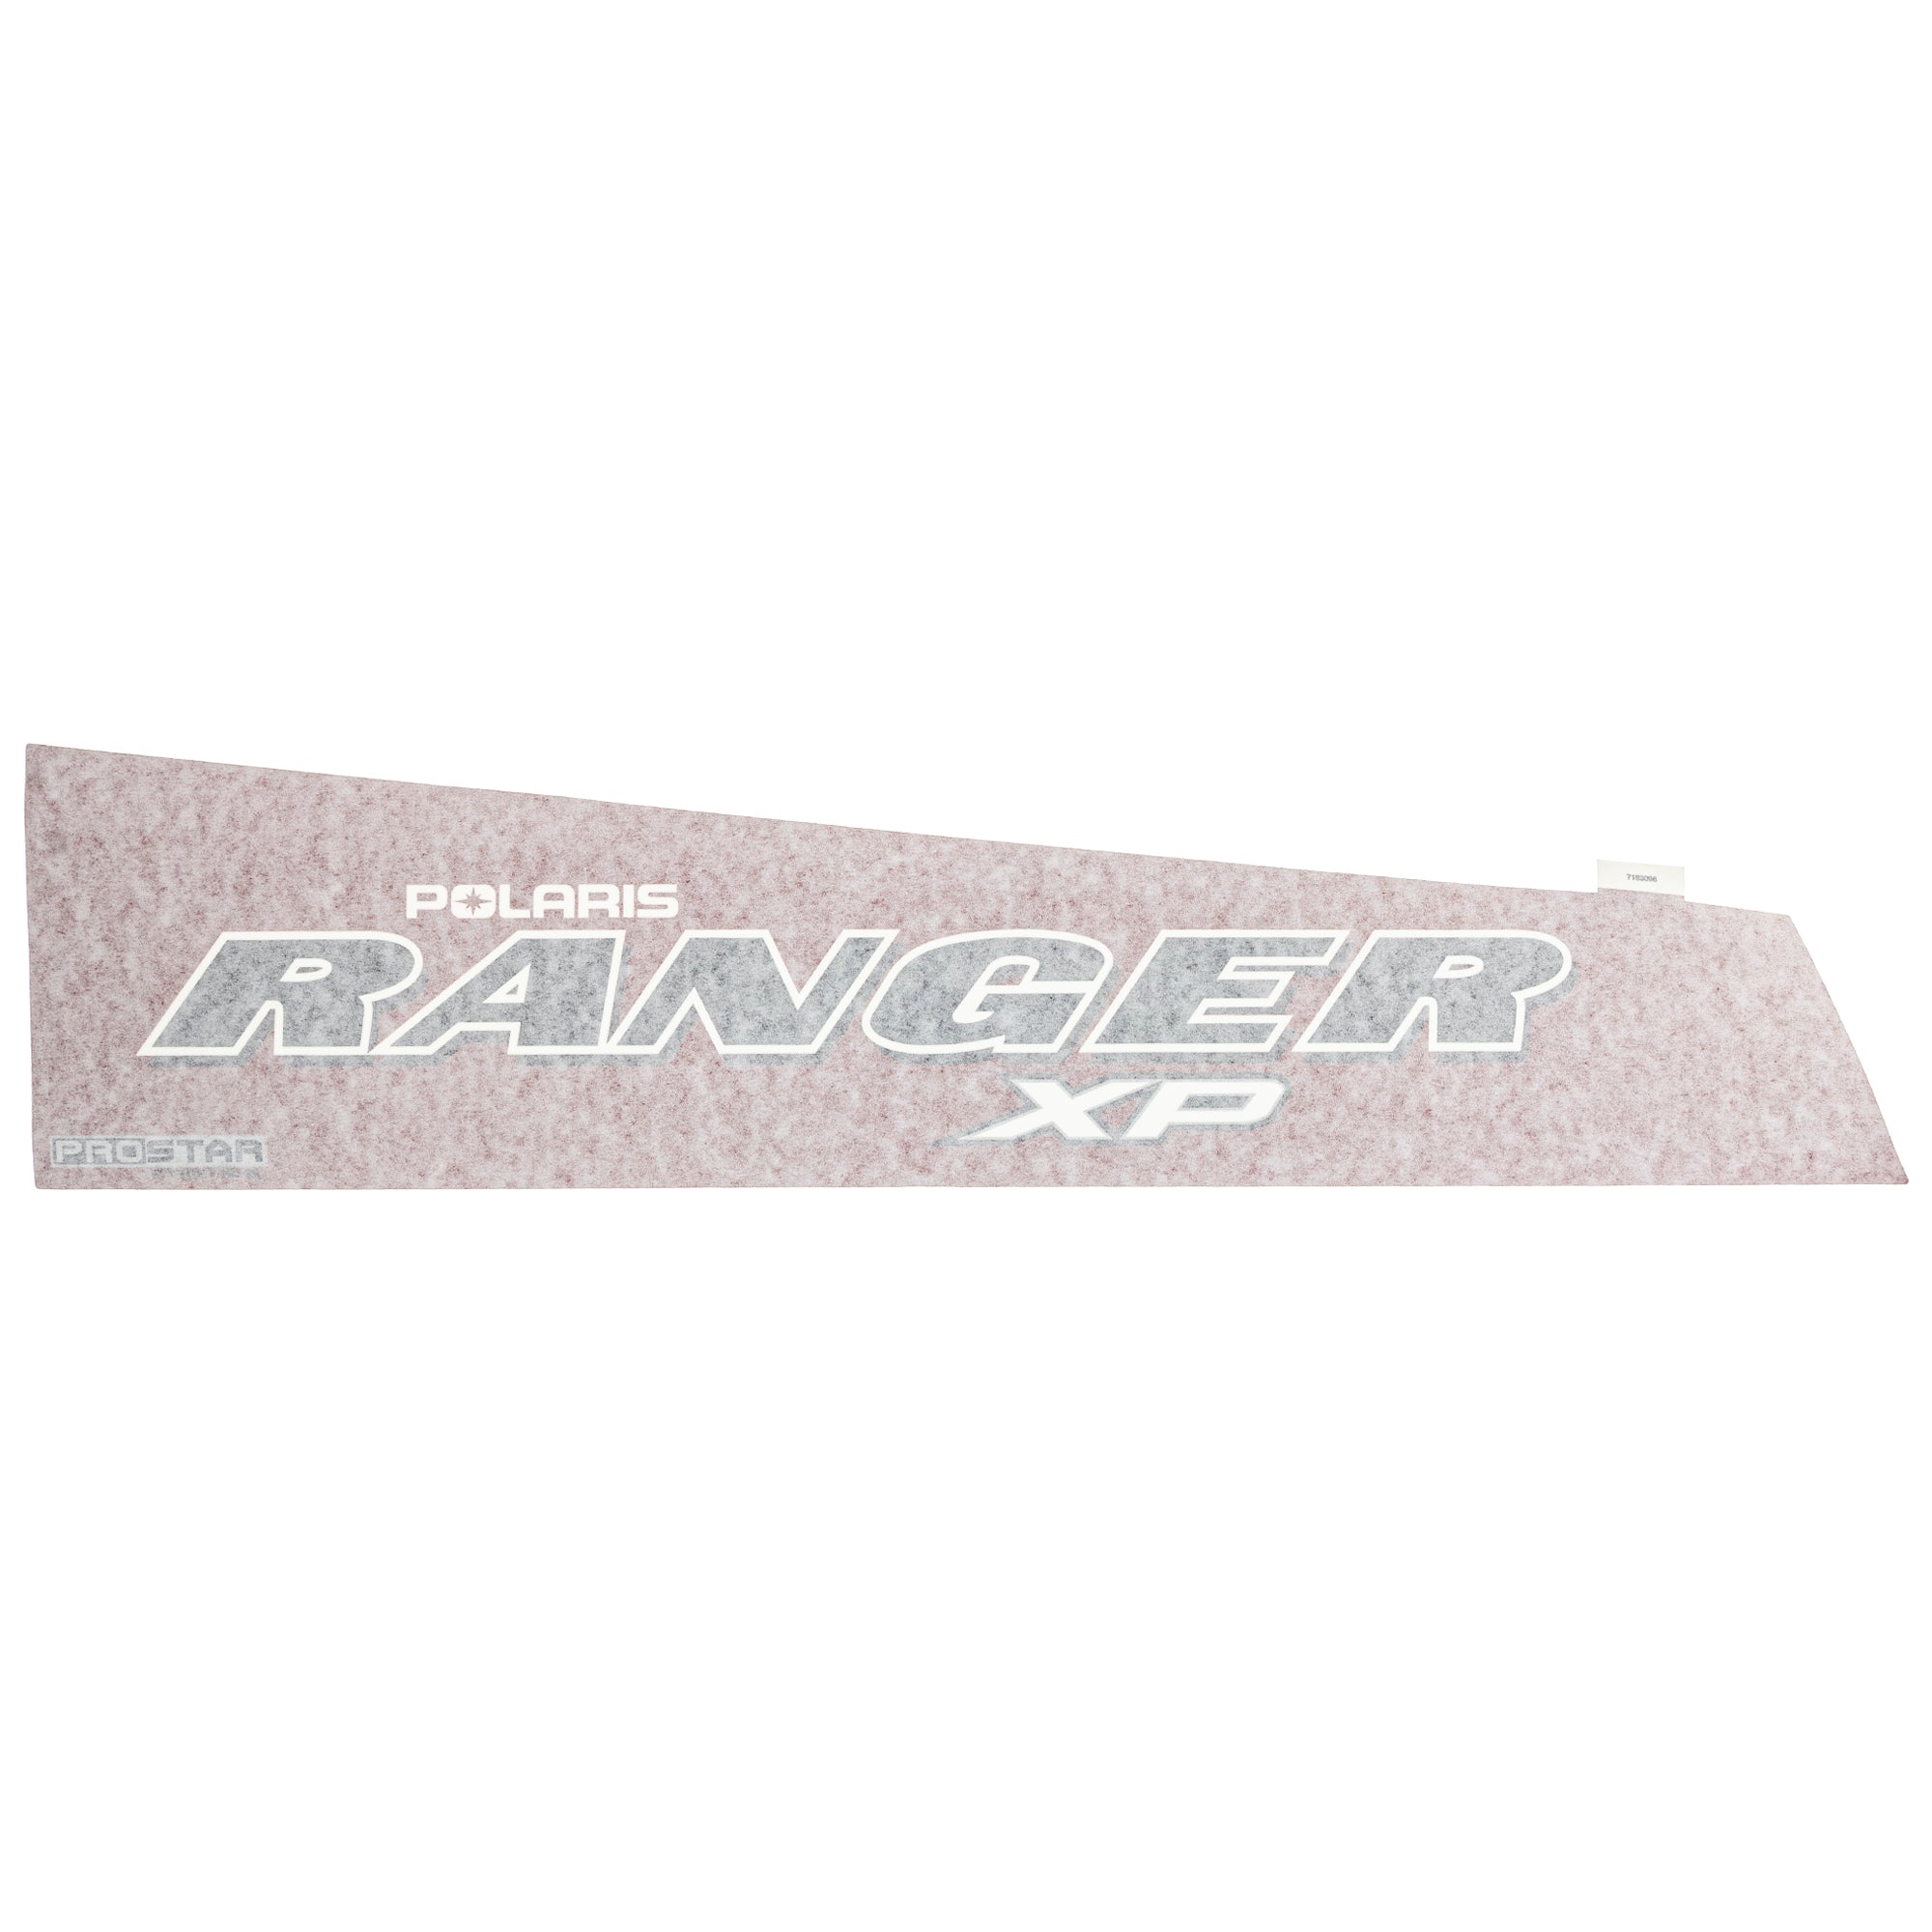 Polaris 7183096 Red Right Hand Prostar XP Box Decal Ranger 570 900 Deluxe EPS High